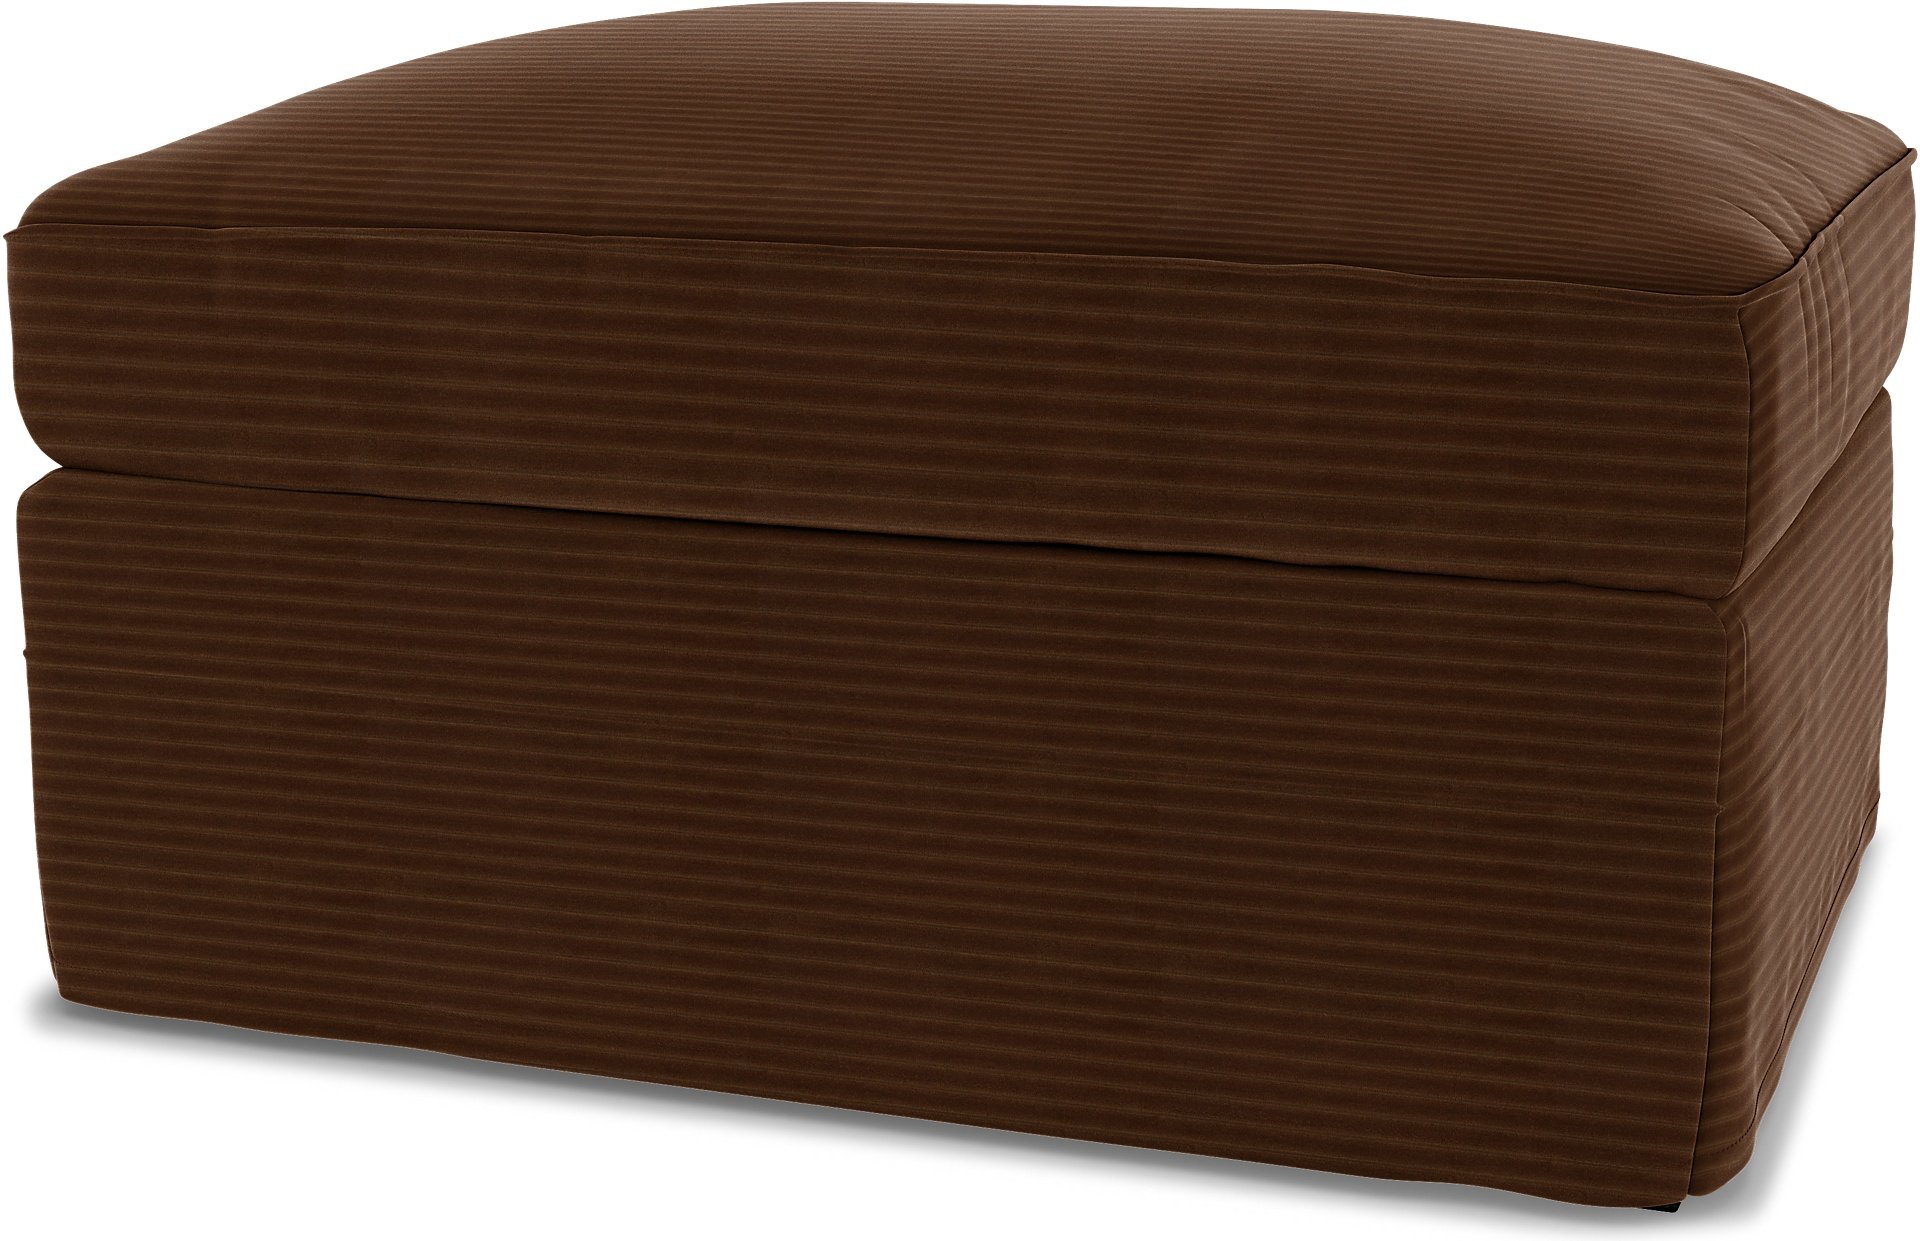 IKEA - Gronlid Footstool with Storage Cover, Chocolate Brown, Corduroy - Bemz